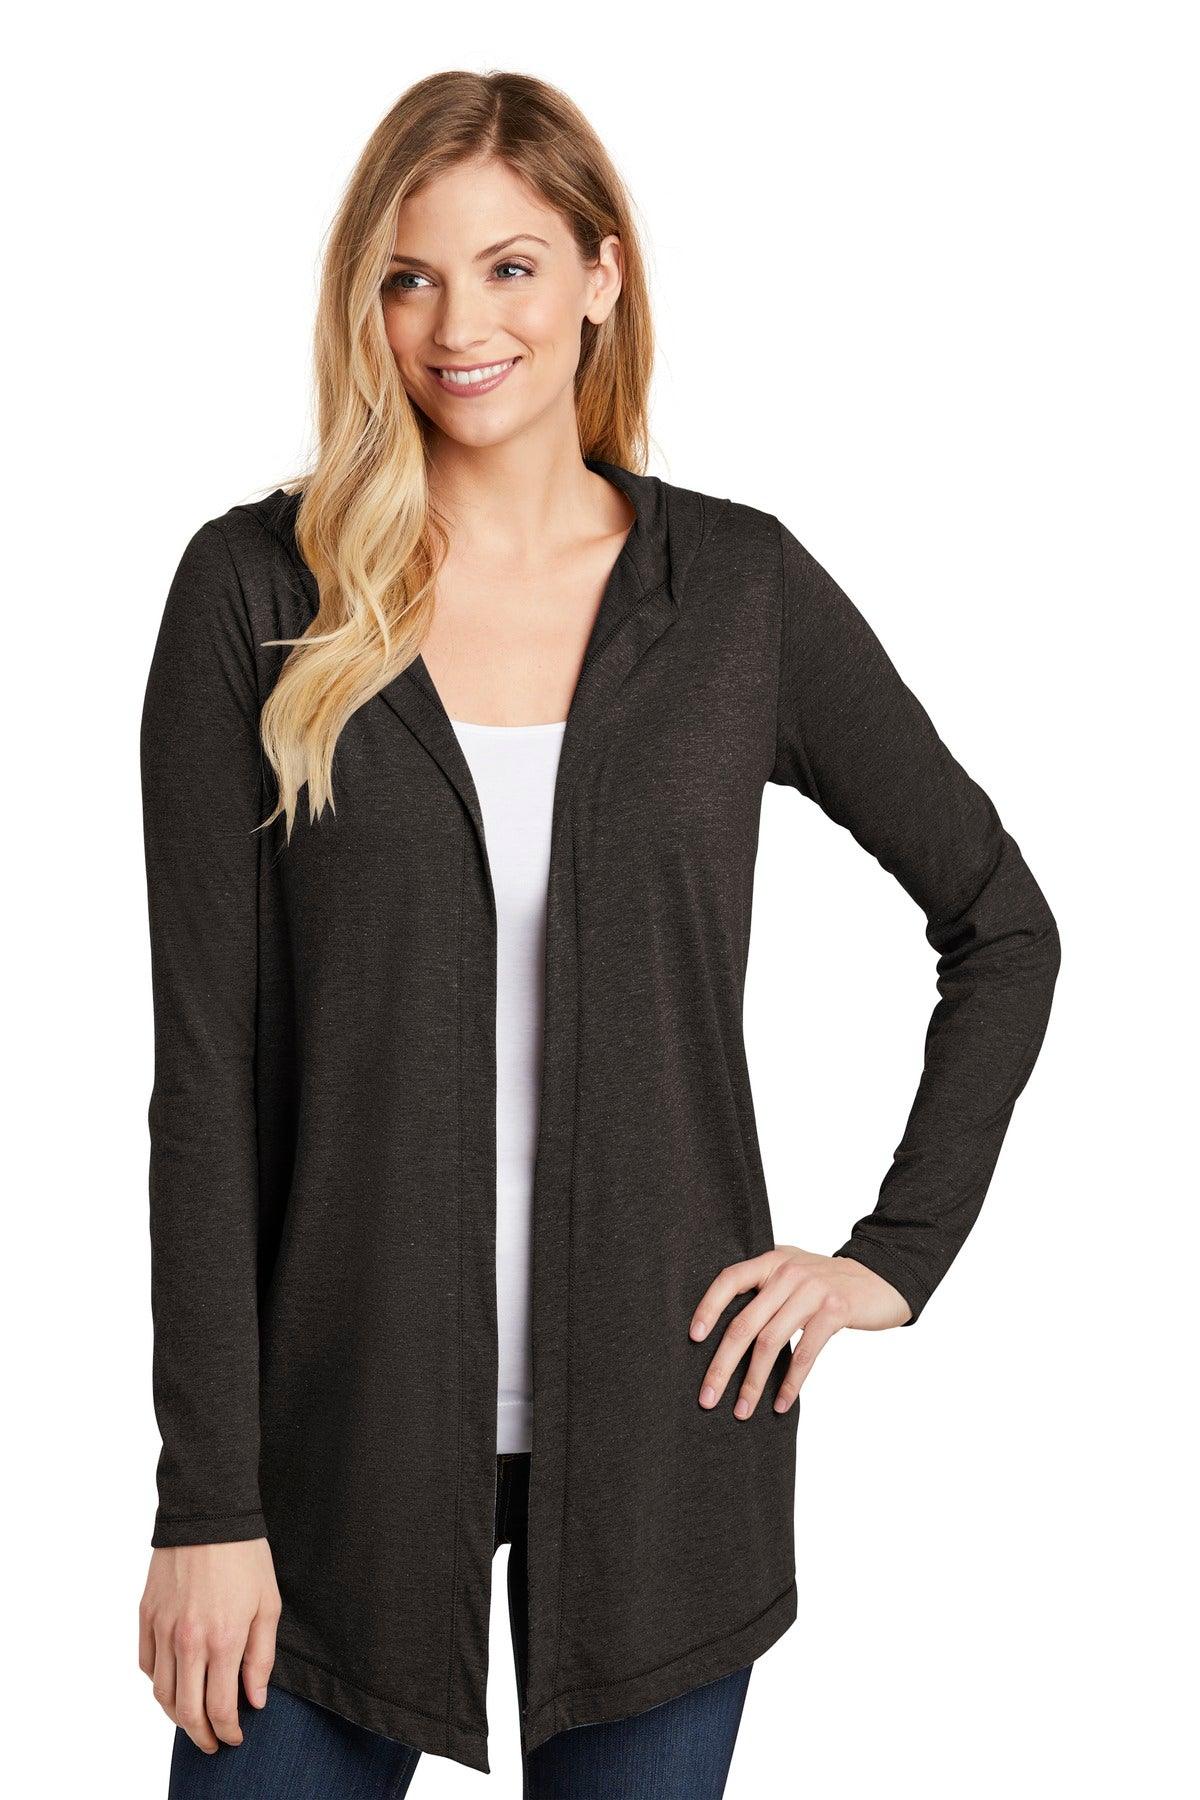 District Women's Perfect Tri Hooded Cardigan. DT156 - Dresses Max